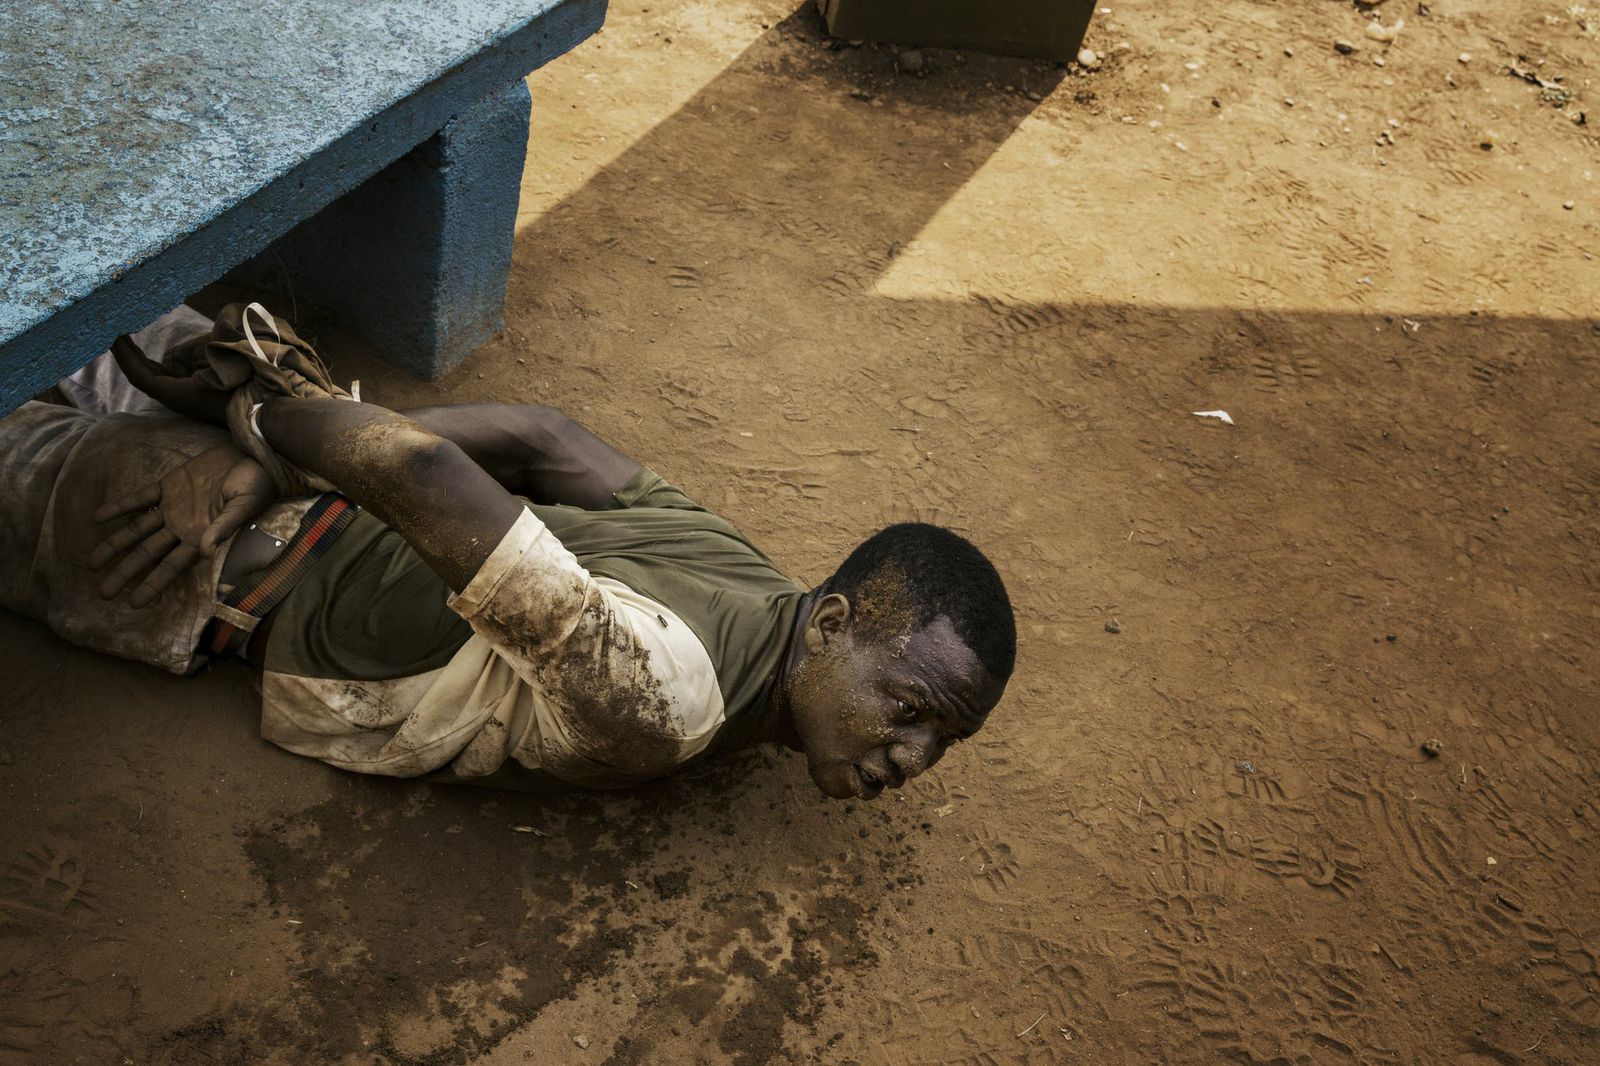 A man arrested by MISCA (Mission Internationale de Soutien a la Centrafrique Sous Conduite Africaine) soldiers lies on the ground with his wrists tied. He was found with a grenade in a pocket. Bangui, Central African Republic.